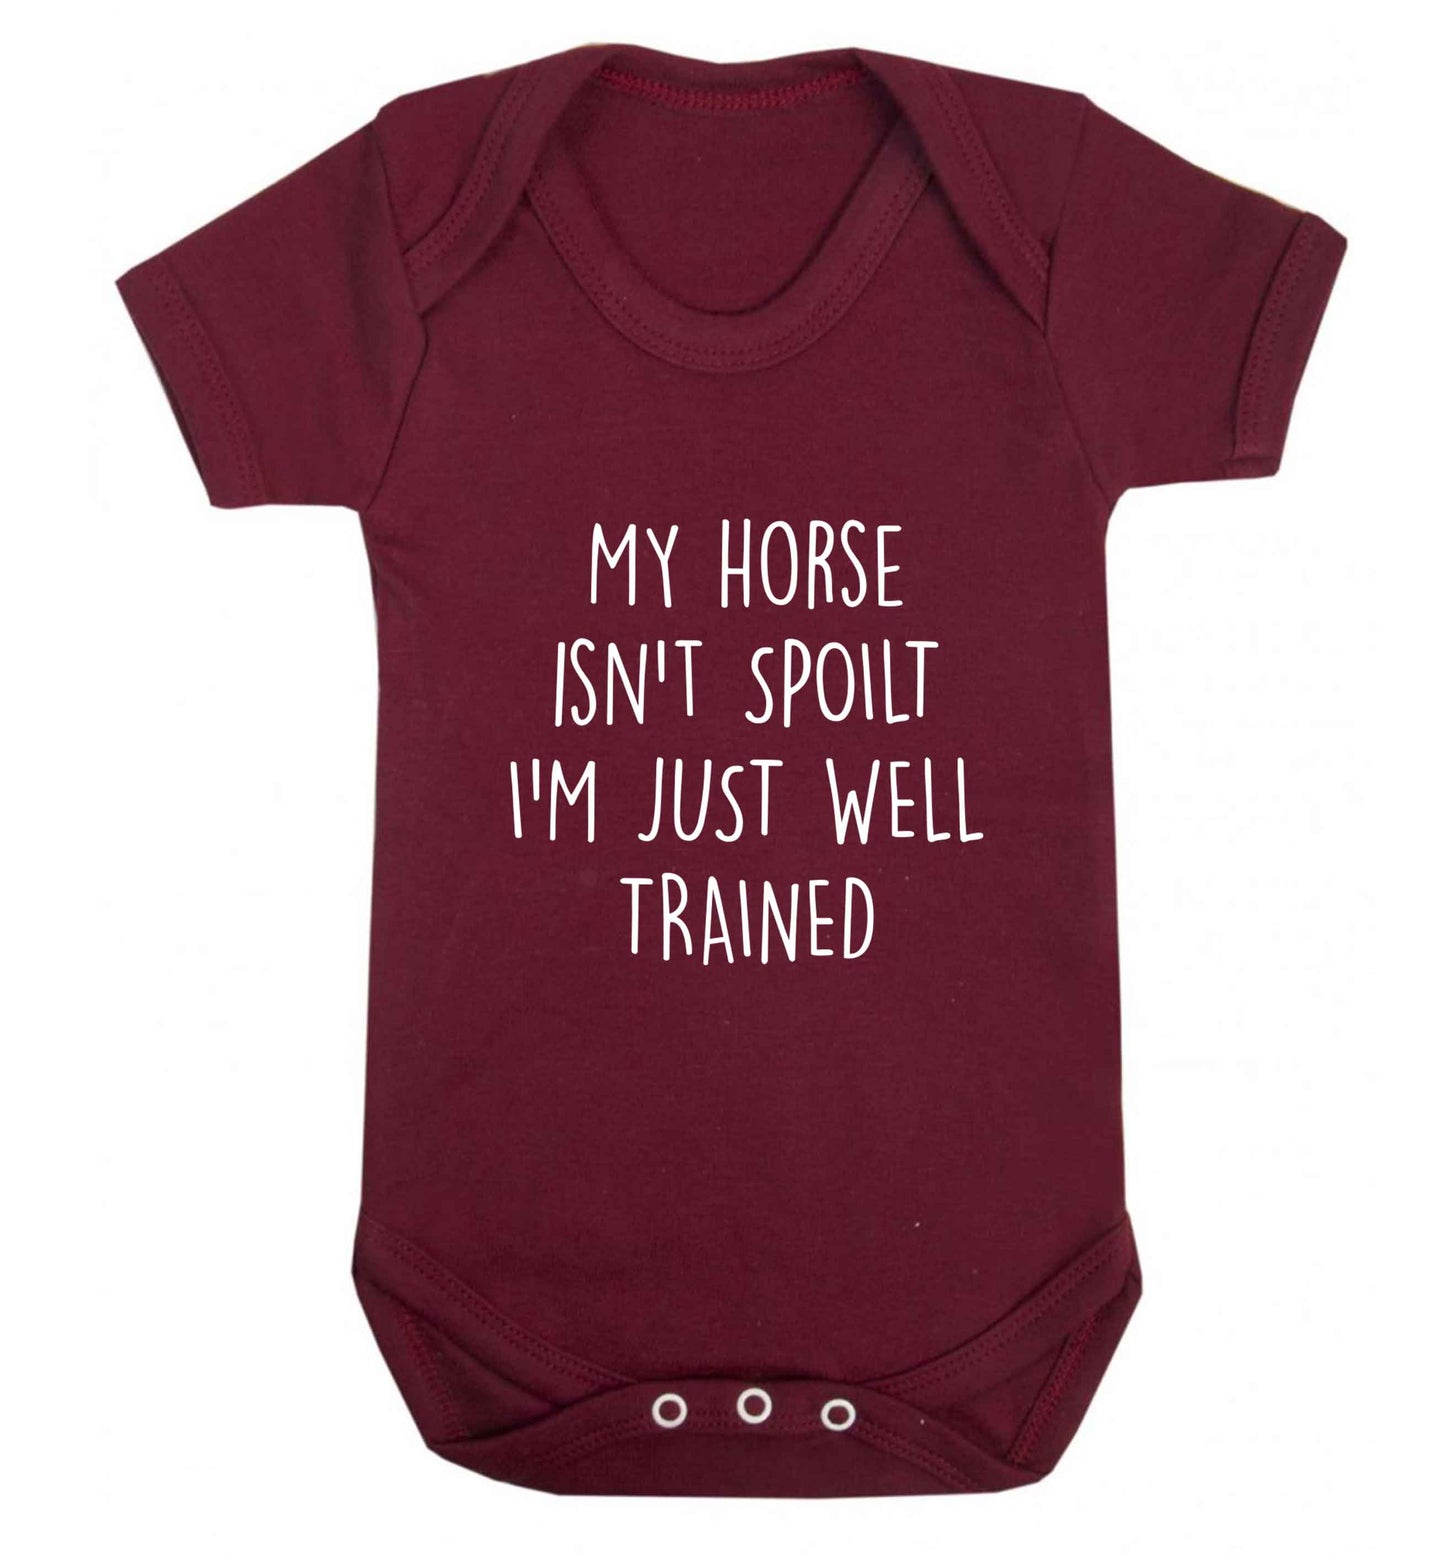 My horse isn't spoilt I'm just well trained baby vest maroon 18-24 months